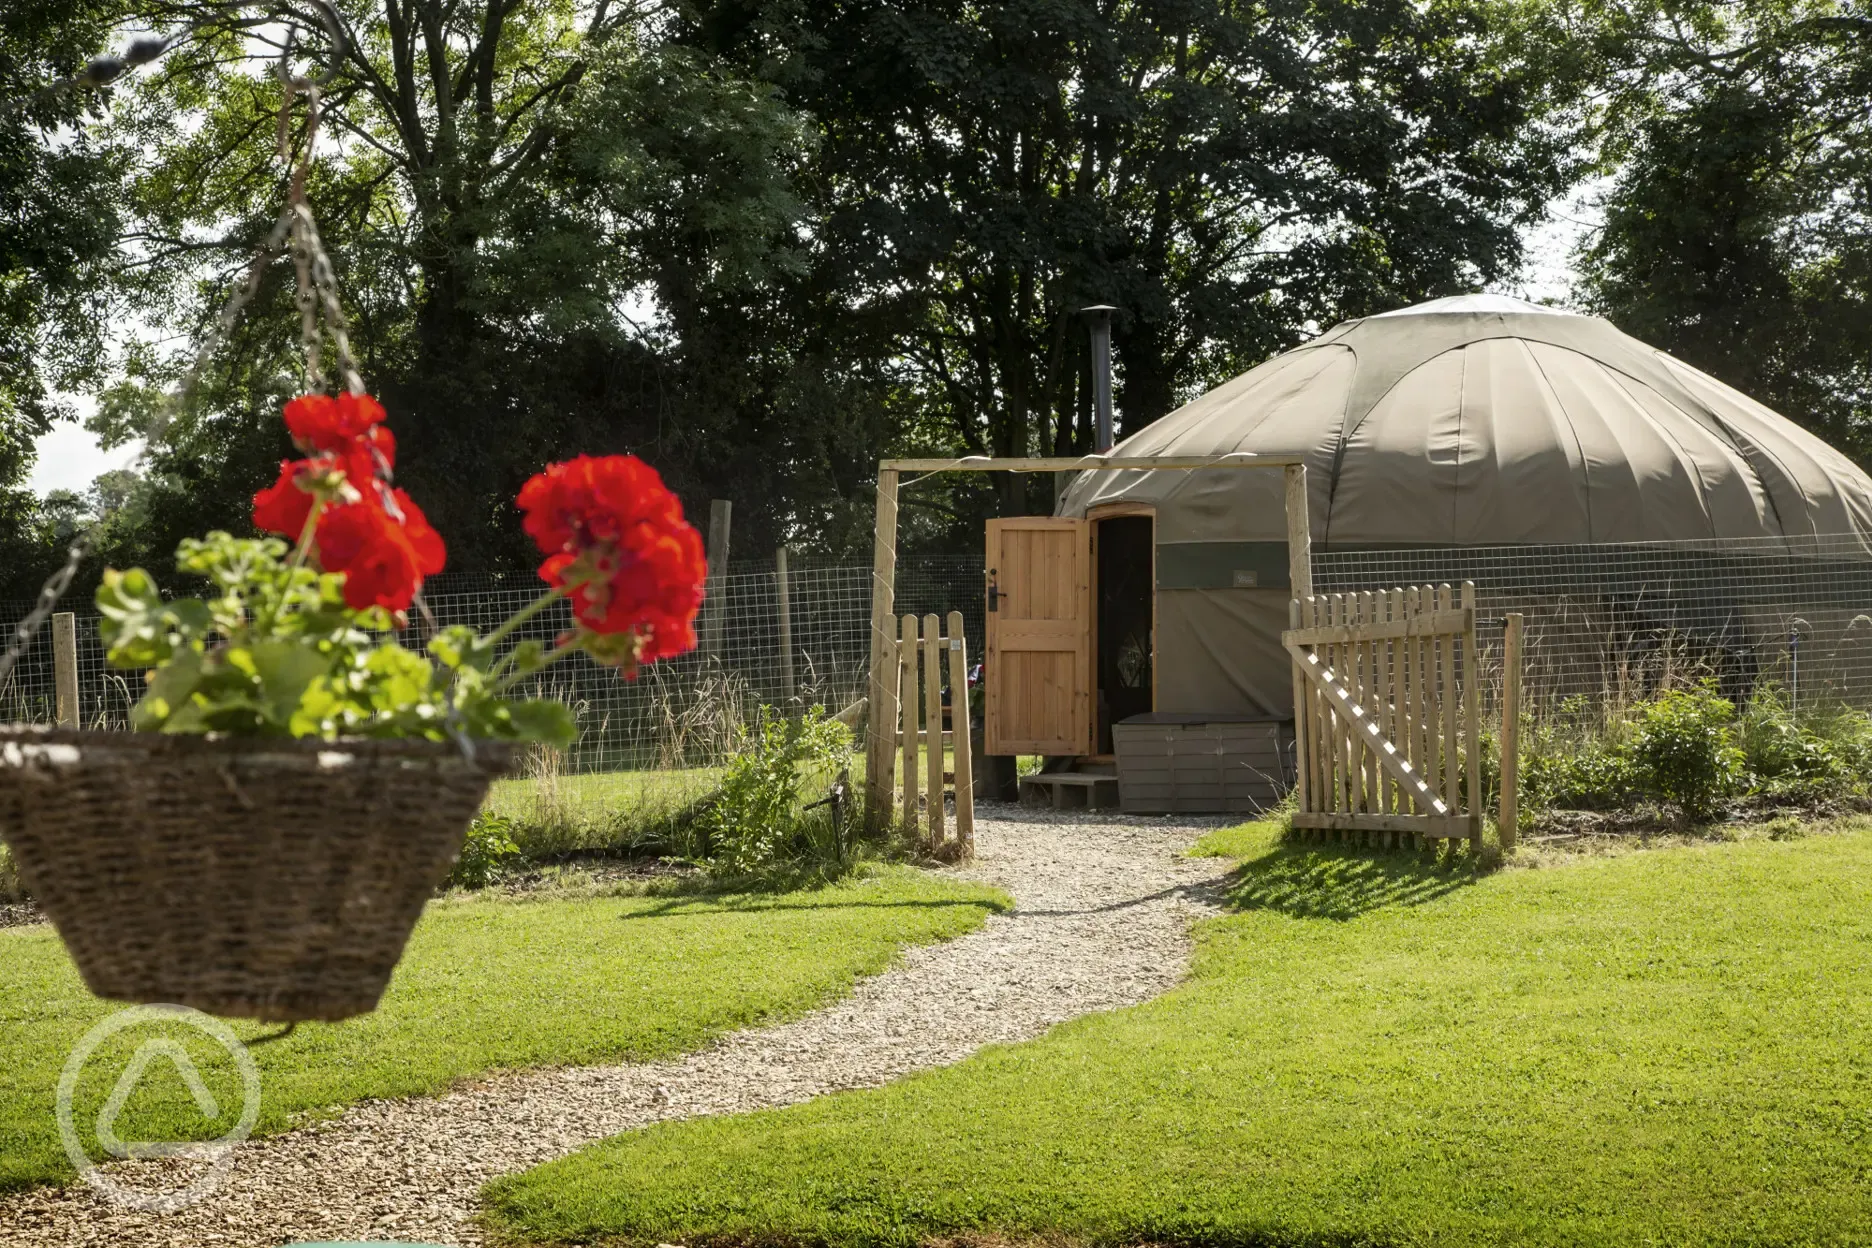 Buttercup Yurt enclosed in a fenced paddock